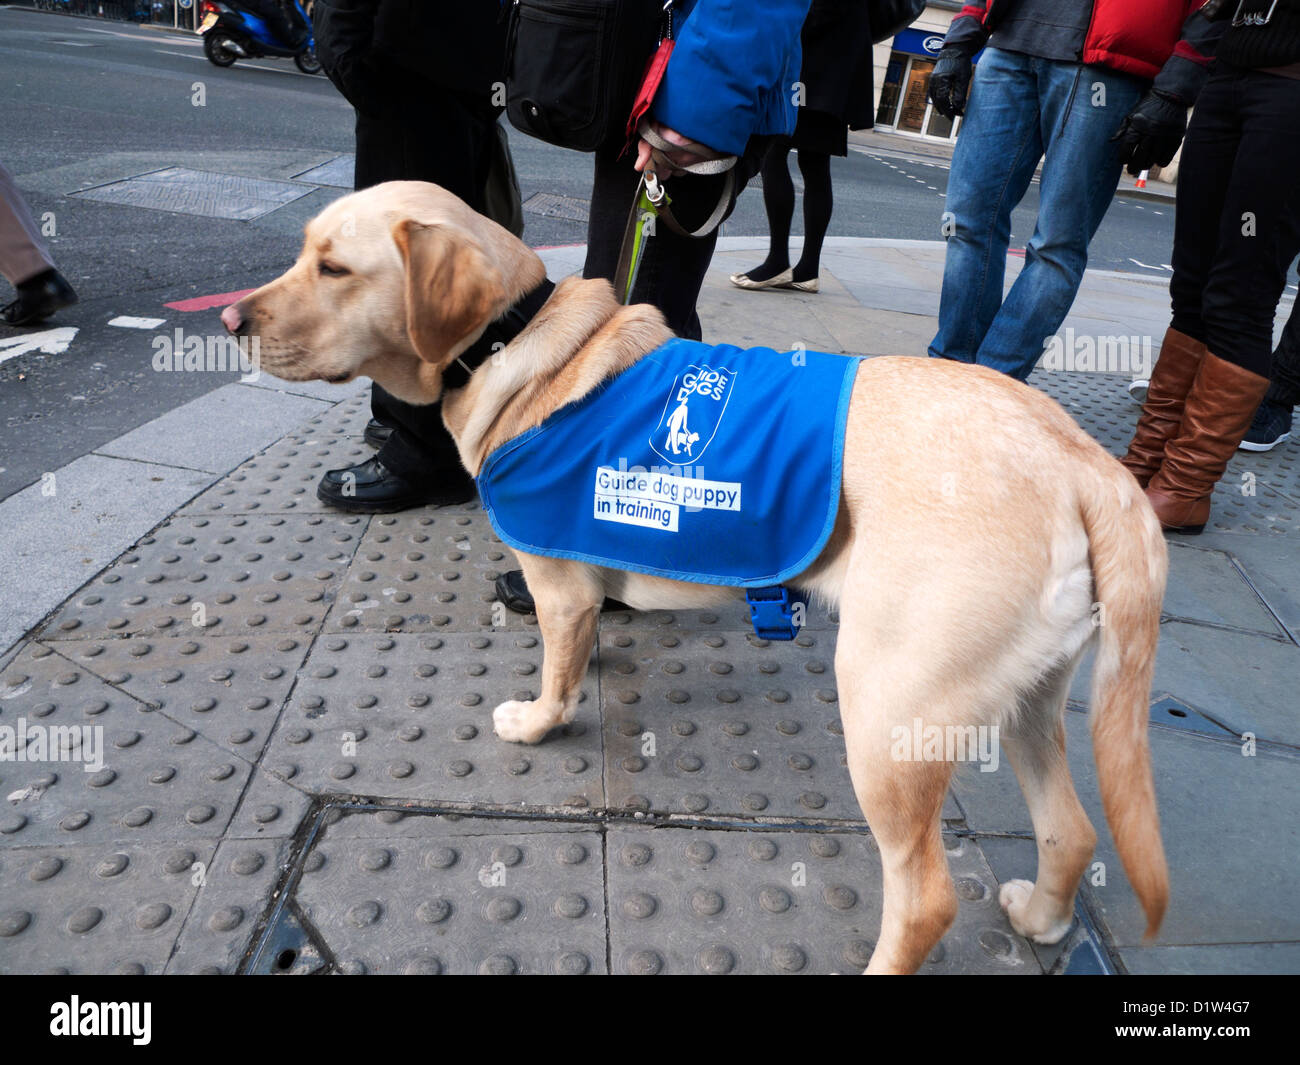 Guide dog puppy seeing eye dogs in training with people standing on a curb on a Bishopsgate street corner in London England UK  KATHY DEWITT Stock Photo